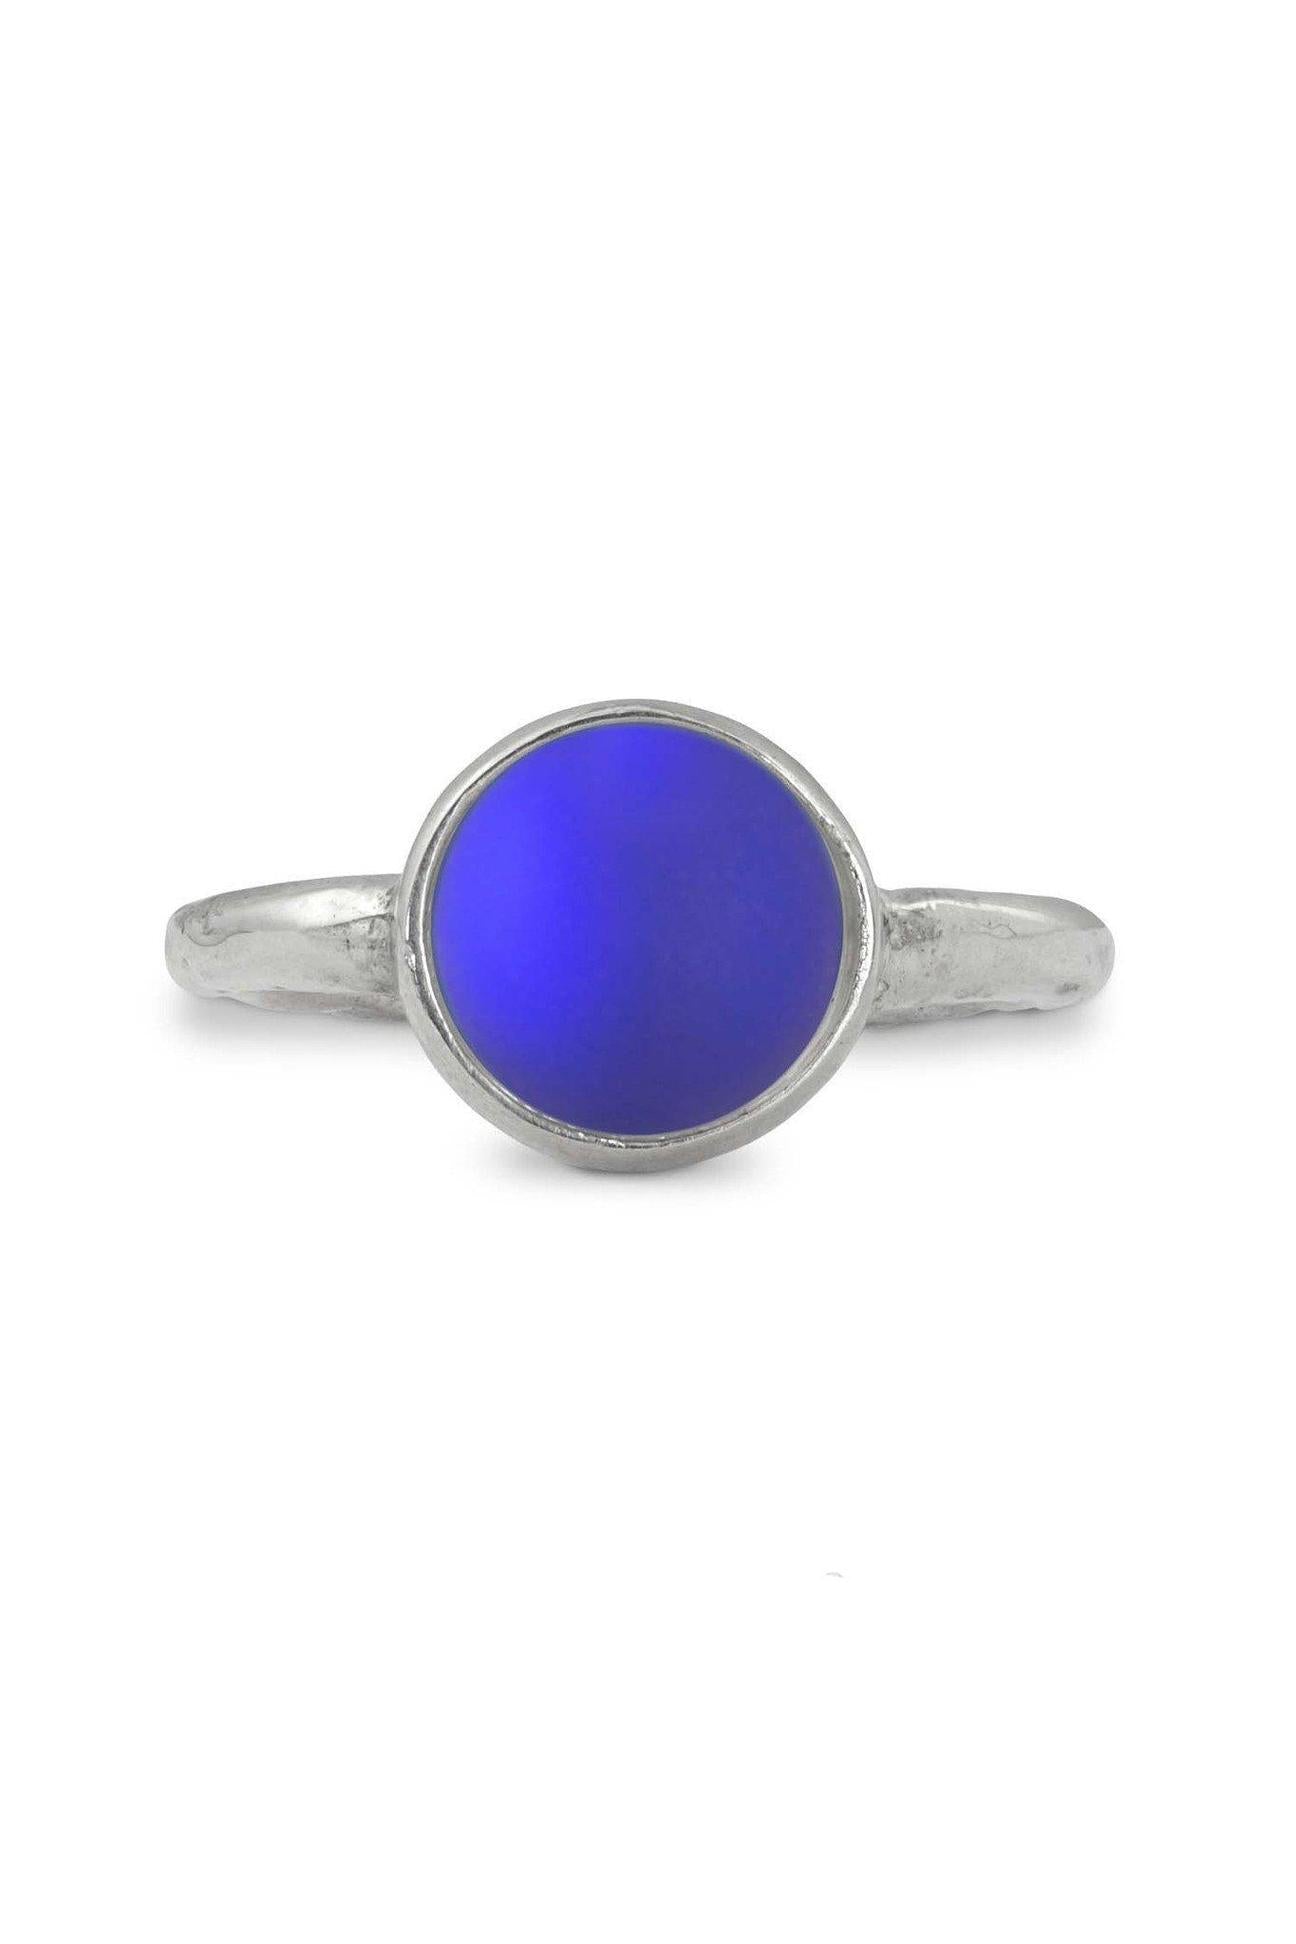 LeightWorks Classic Ring